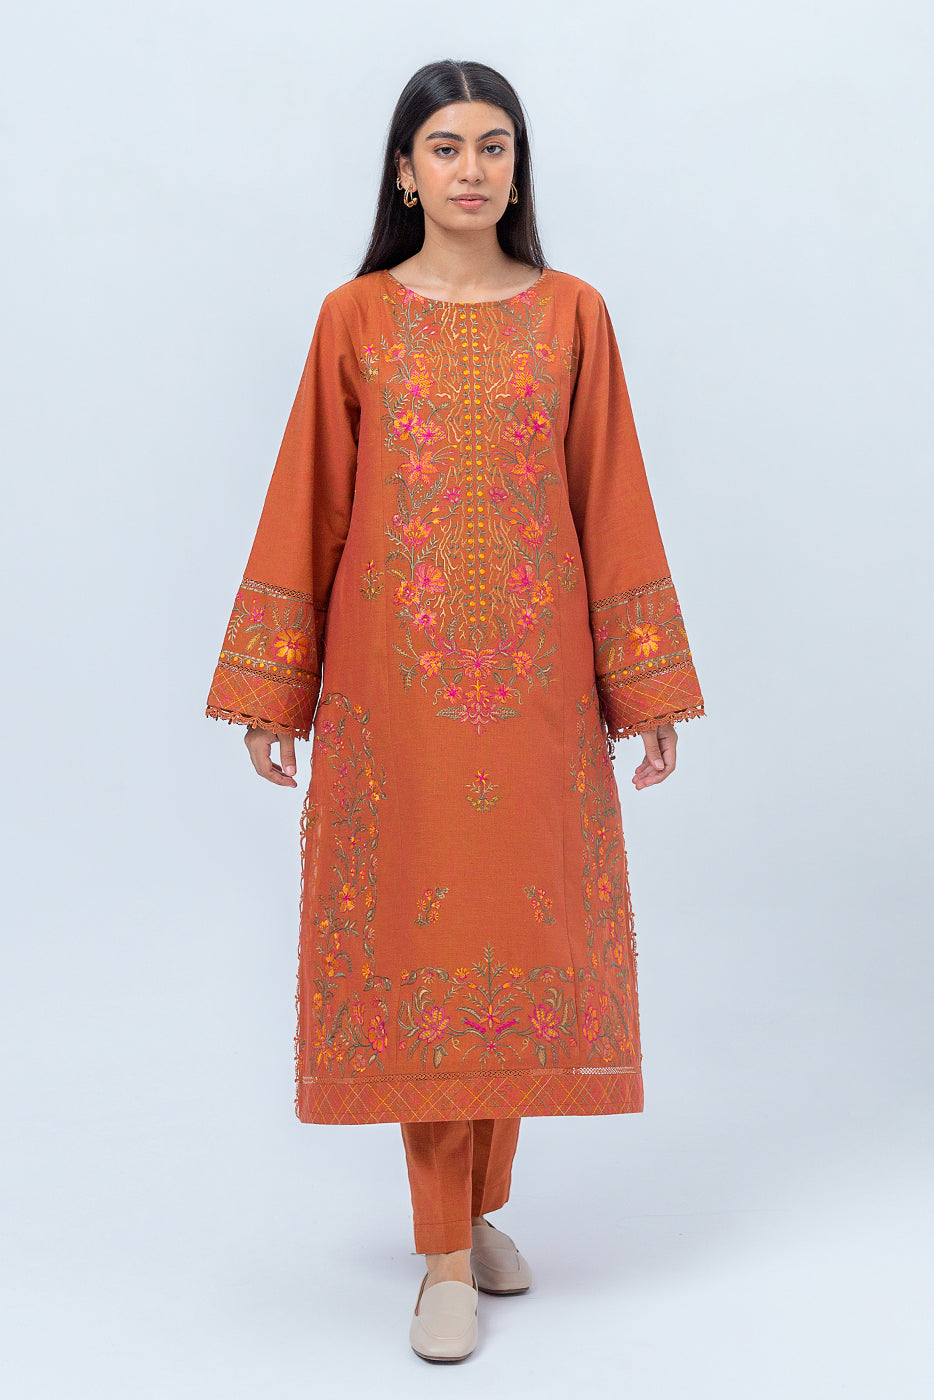 2 PIECE - EMBROIDERED KHADDAR SUIT - AUTUMN MAPLE (UNSTITCHED) - BEECHTREE